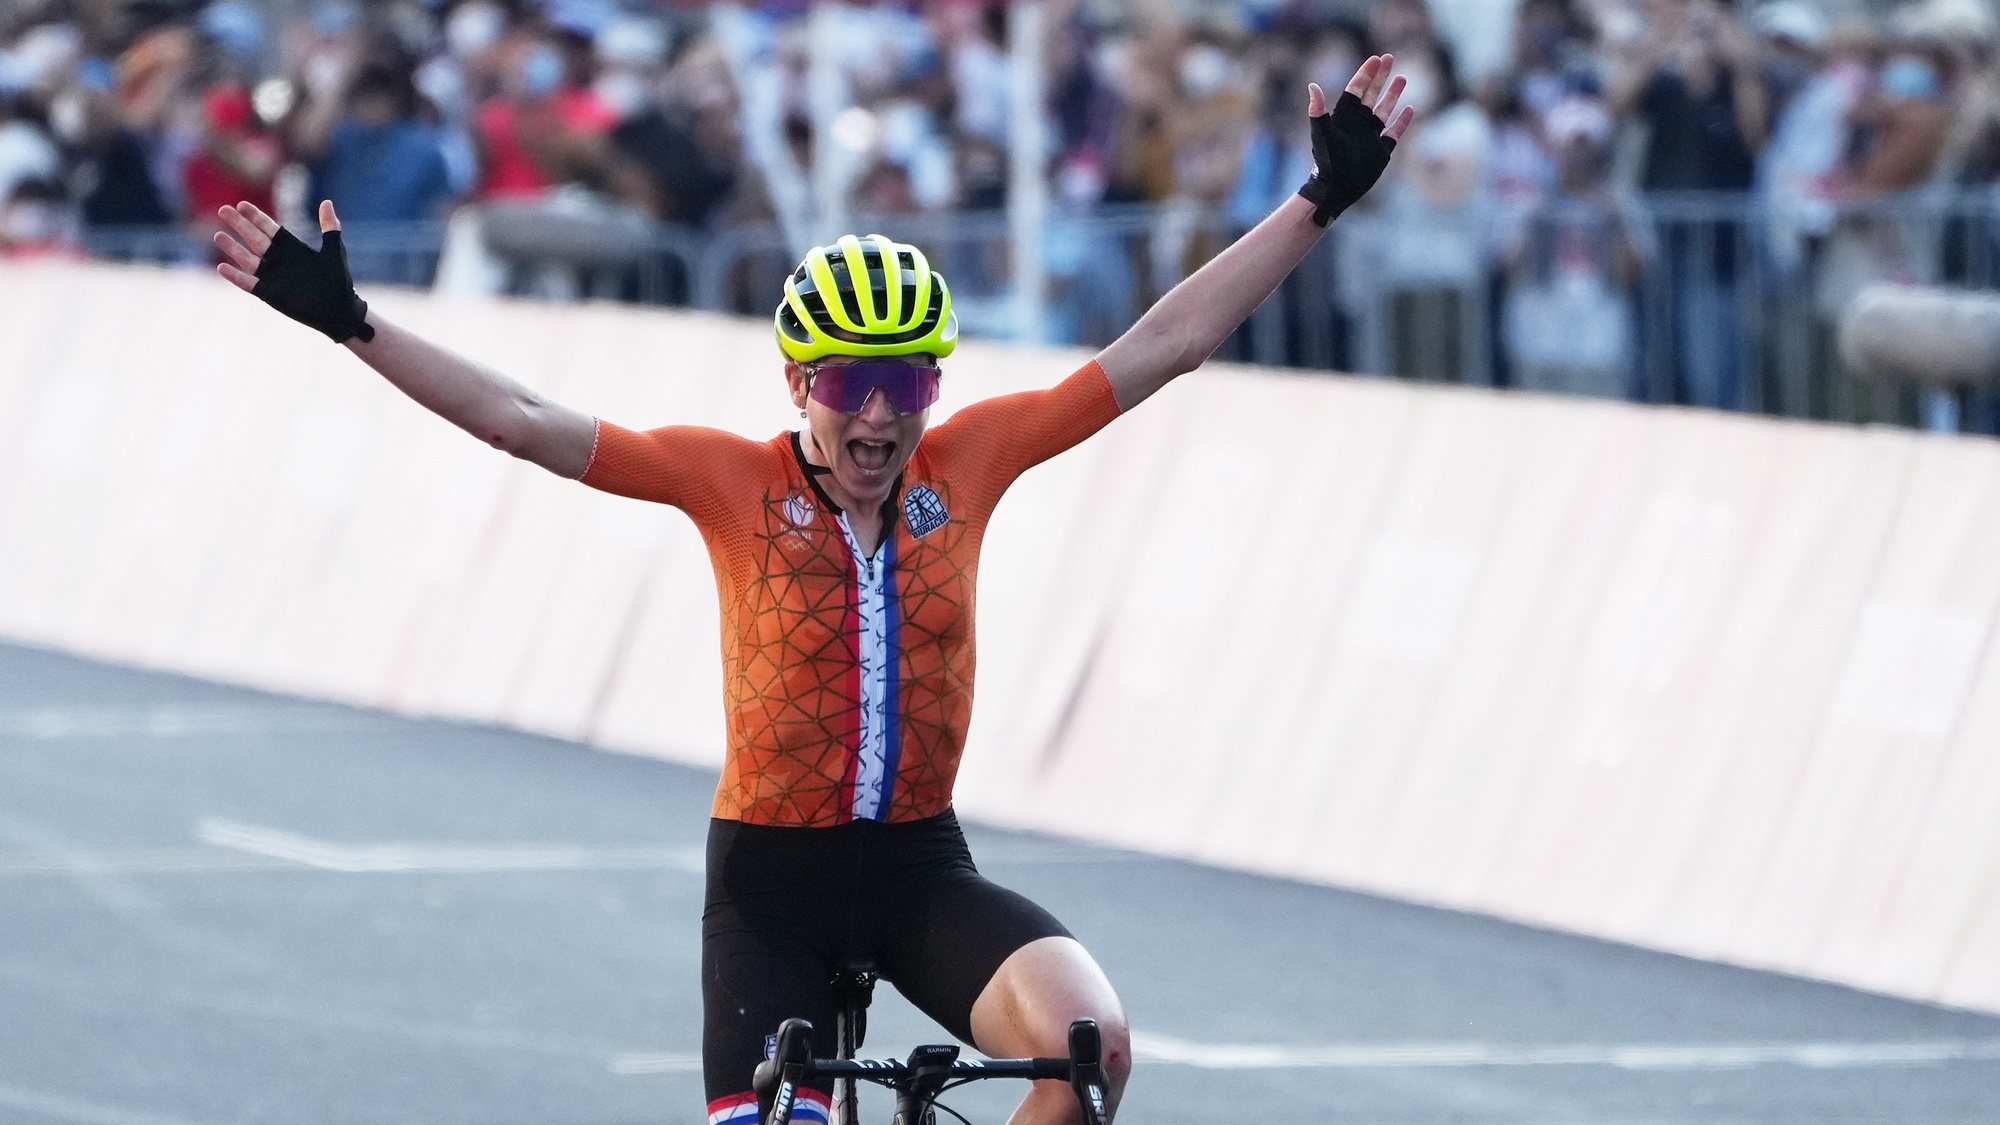 epa09364074 Annemiek van Vleuten of the Netherlands celebrates as she crosses the finish line in 4th place in the Women&#039;s Road Cycling race of the Tokyo 2020 Olympic Games at the Fuji International Speedway in Oyama, Japan, 25 July 2021.  EPA/CHRISTOPHER JUE